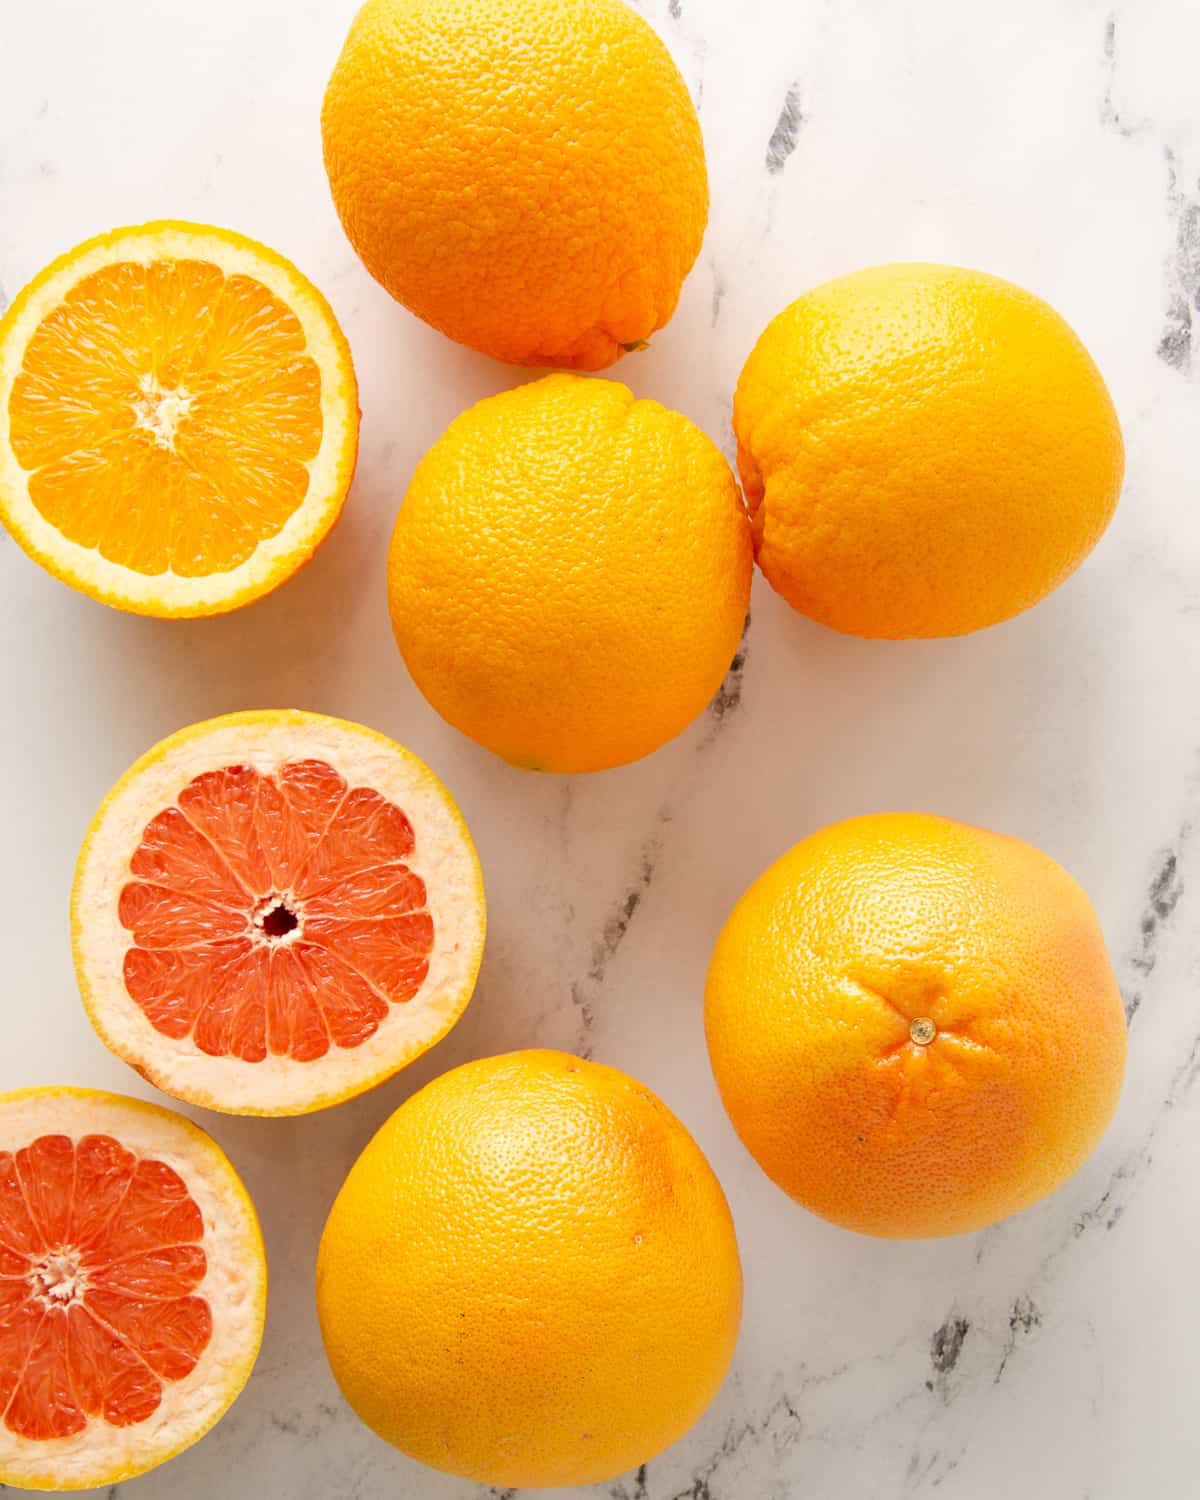 Some whole and some orange halves on a white countertop.